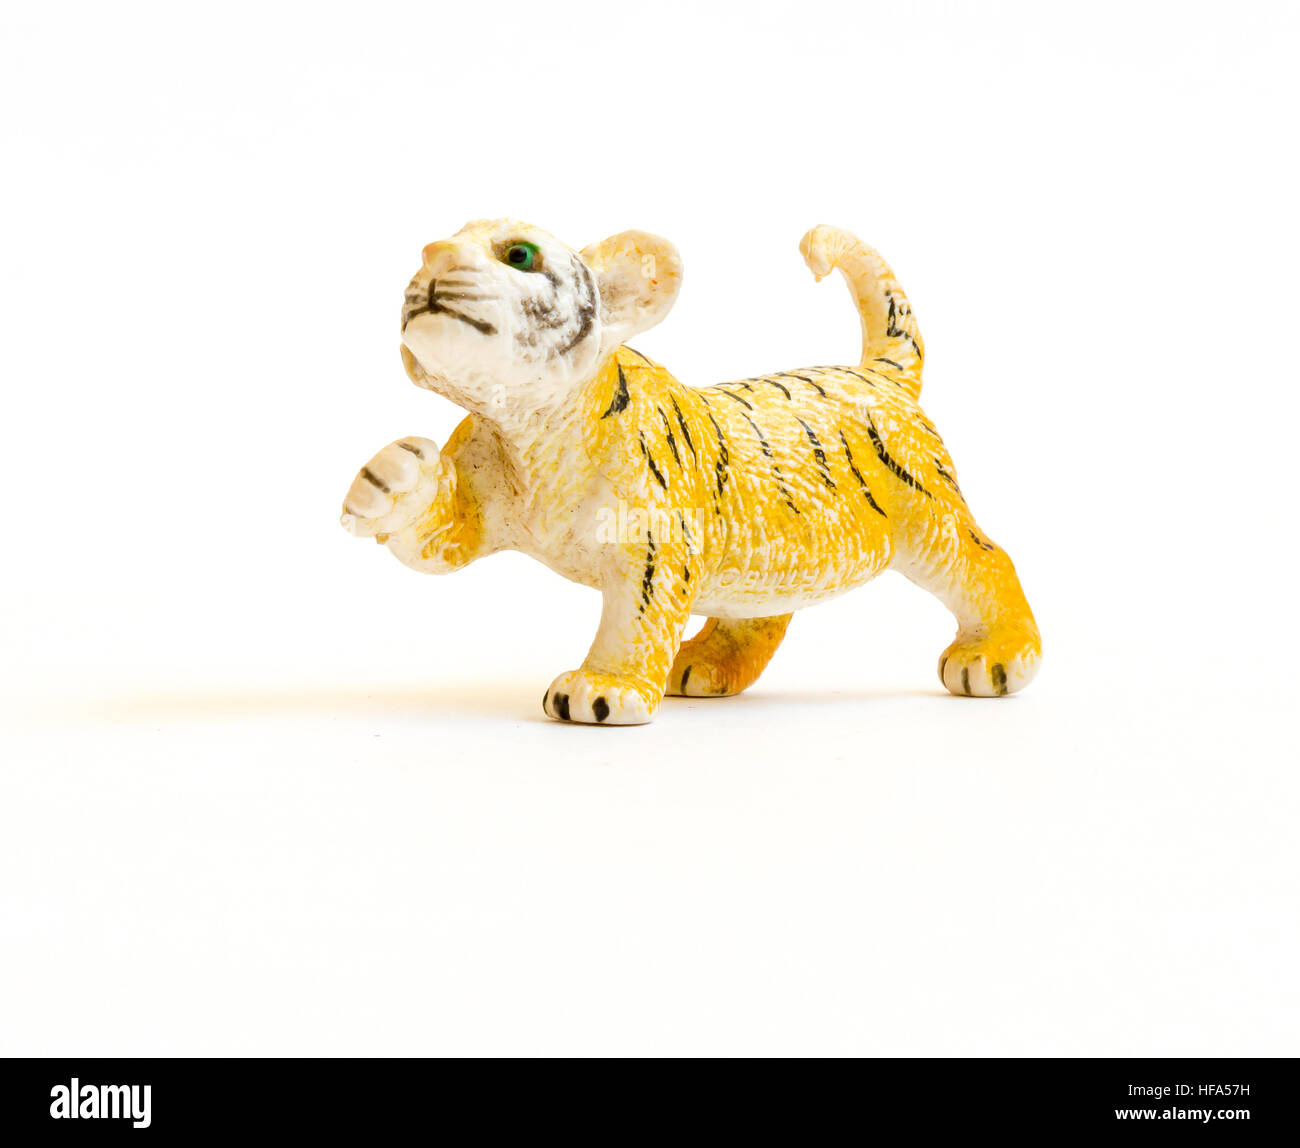 The Miniature isolated toy tiger. Stock Photo